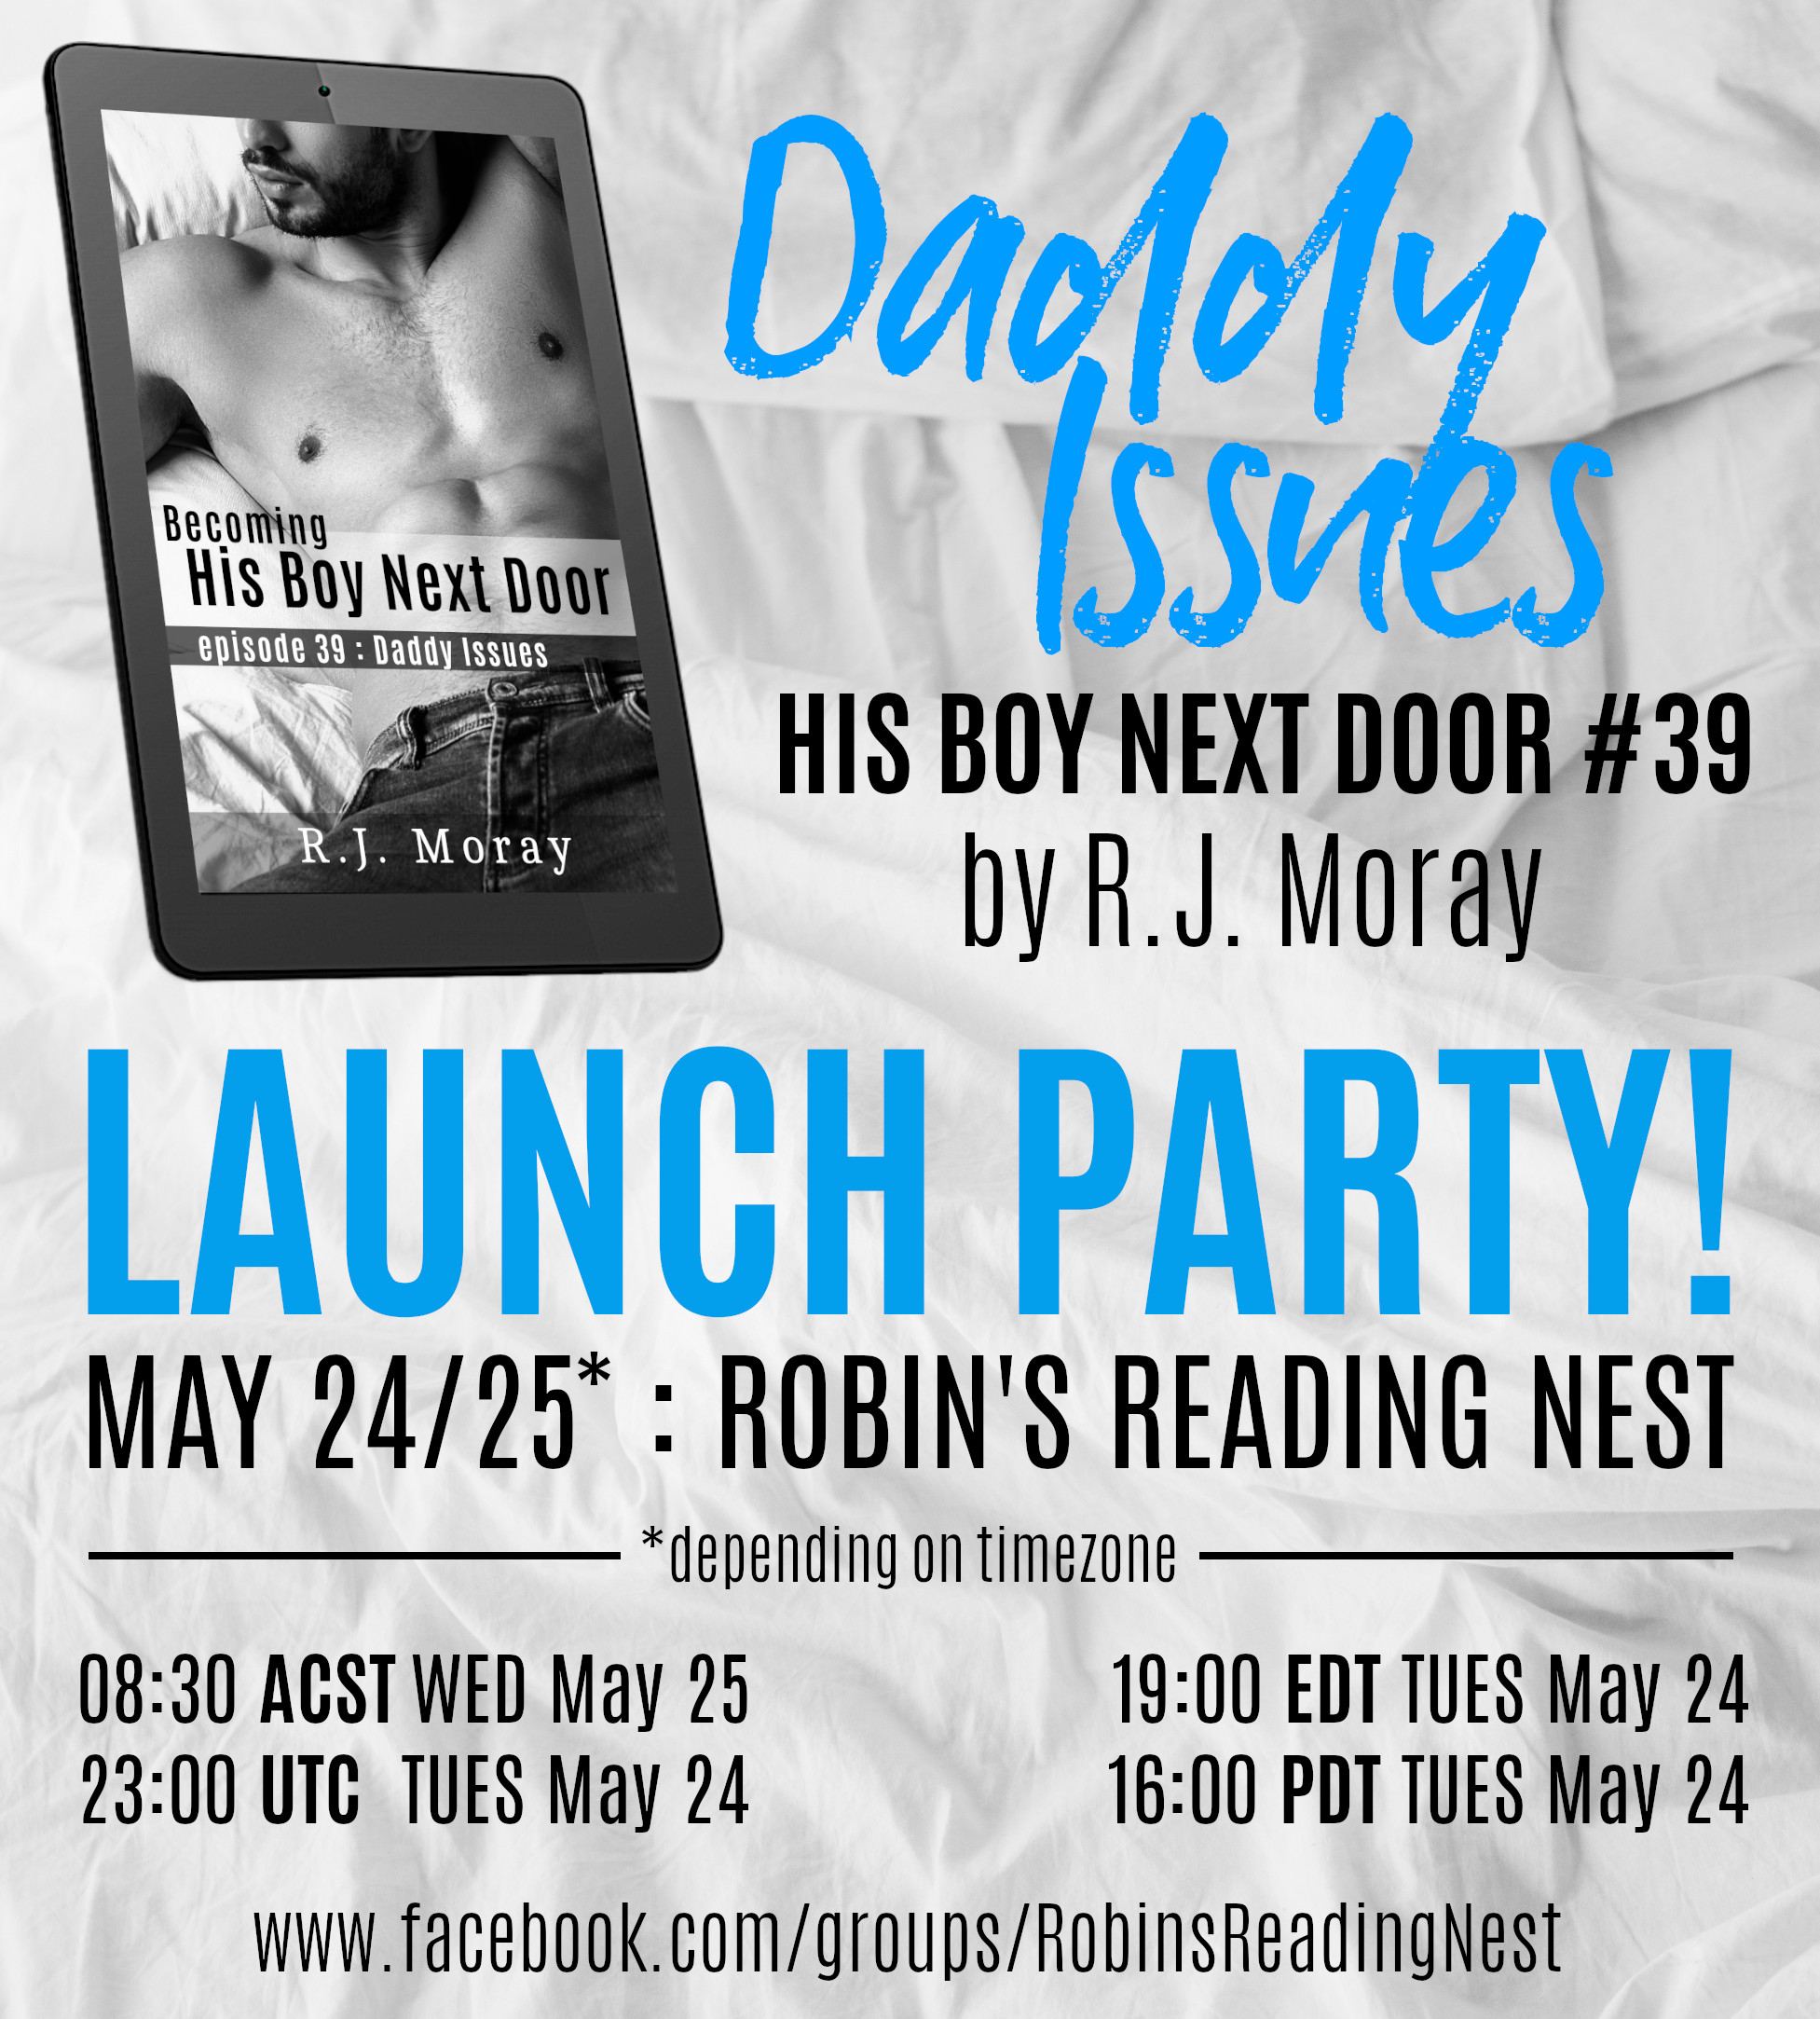 Daddy Issues, His Boy Next Door 39, by R.J. Moray. Launch Party, May 24 - 25 (Depending on timezone) Robin's Reading Nest. 08:30 ACST Wednesday May 25, 23:00 UTC Tuesday May 24, 19:00 EDT Tuesday May 24, 16:00 PDT Tuesday May 24. www.facebook.com/groups/RobinsReadingNest